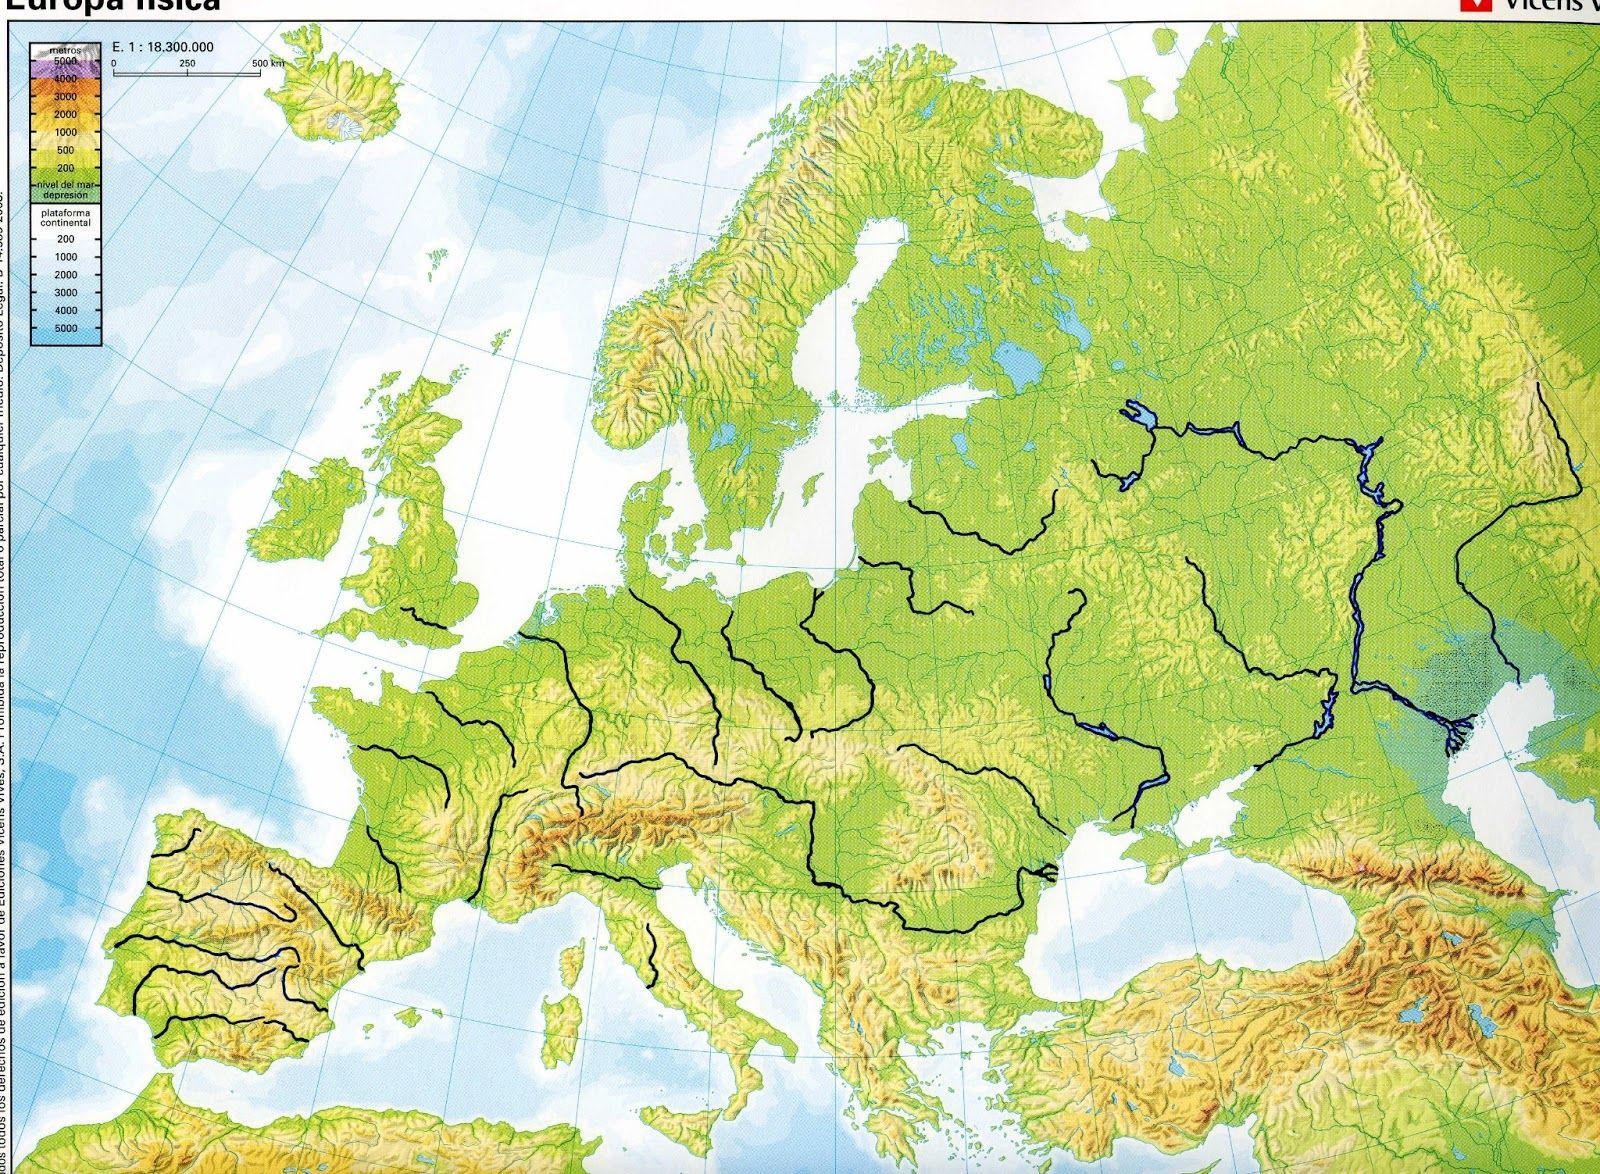 Physical Geography Map of Europe